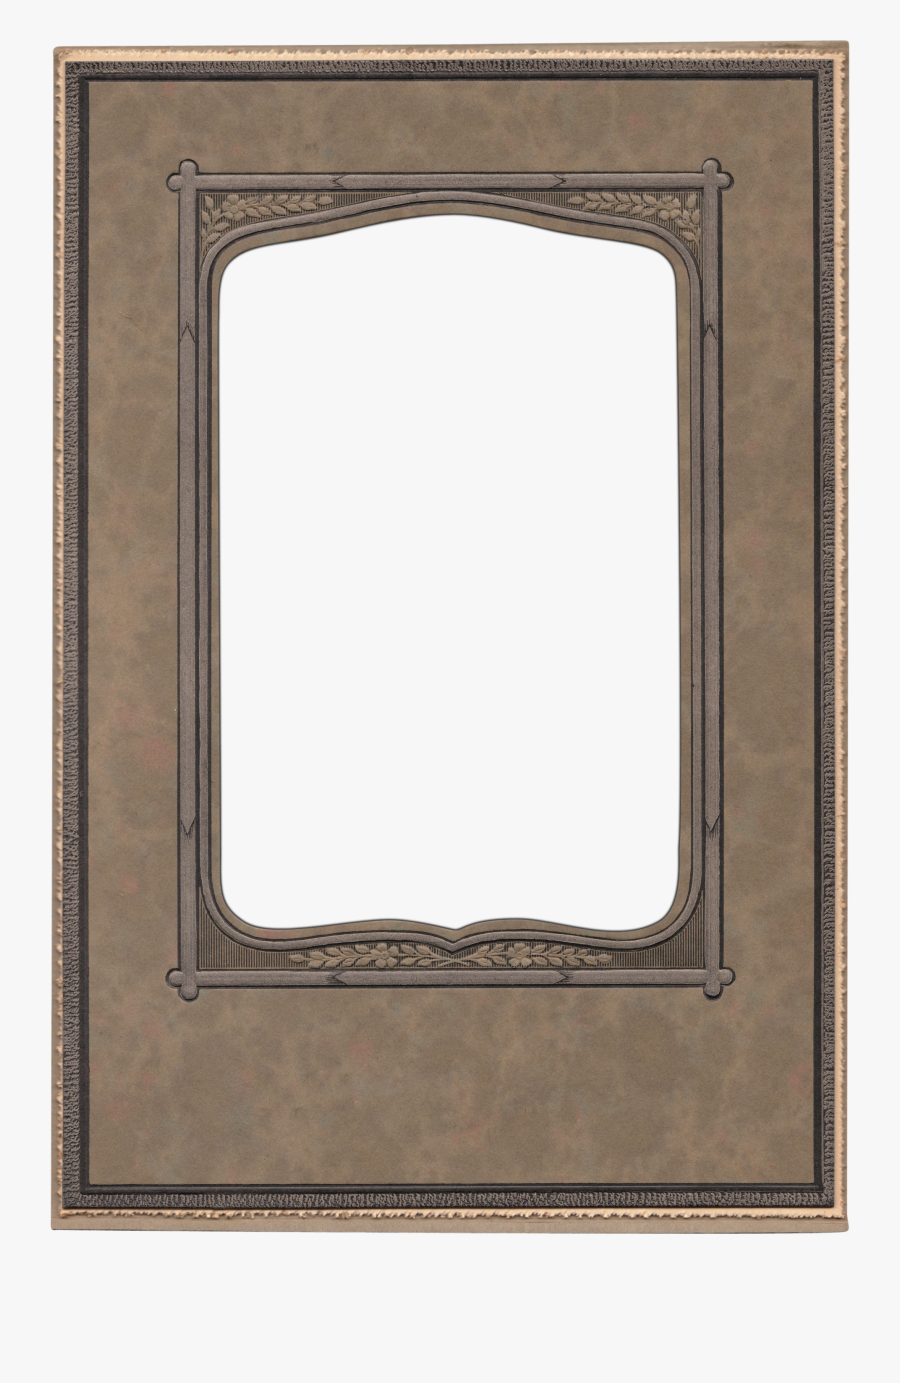 Picture Square, Pattern Frame Wood Inc - Mirror, Transparent Clipart